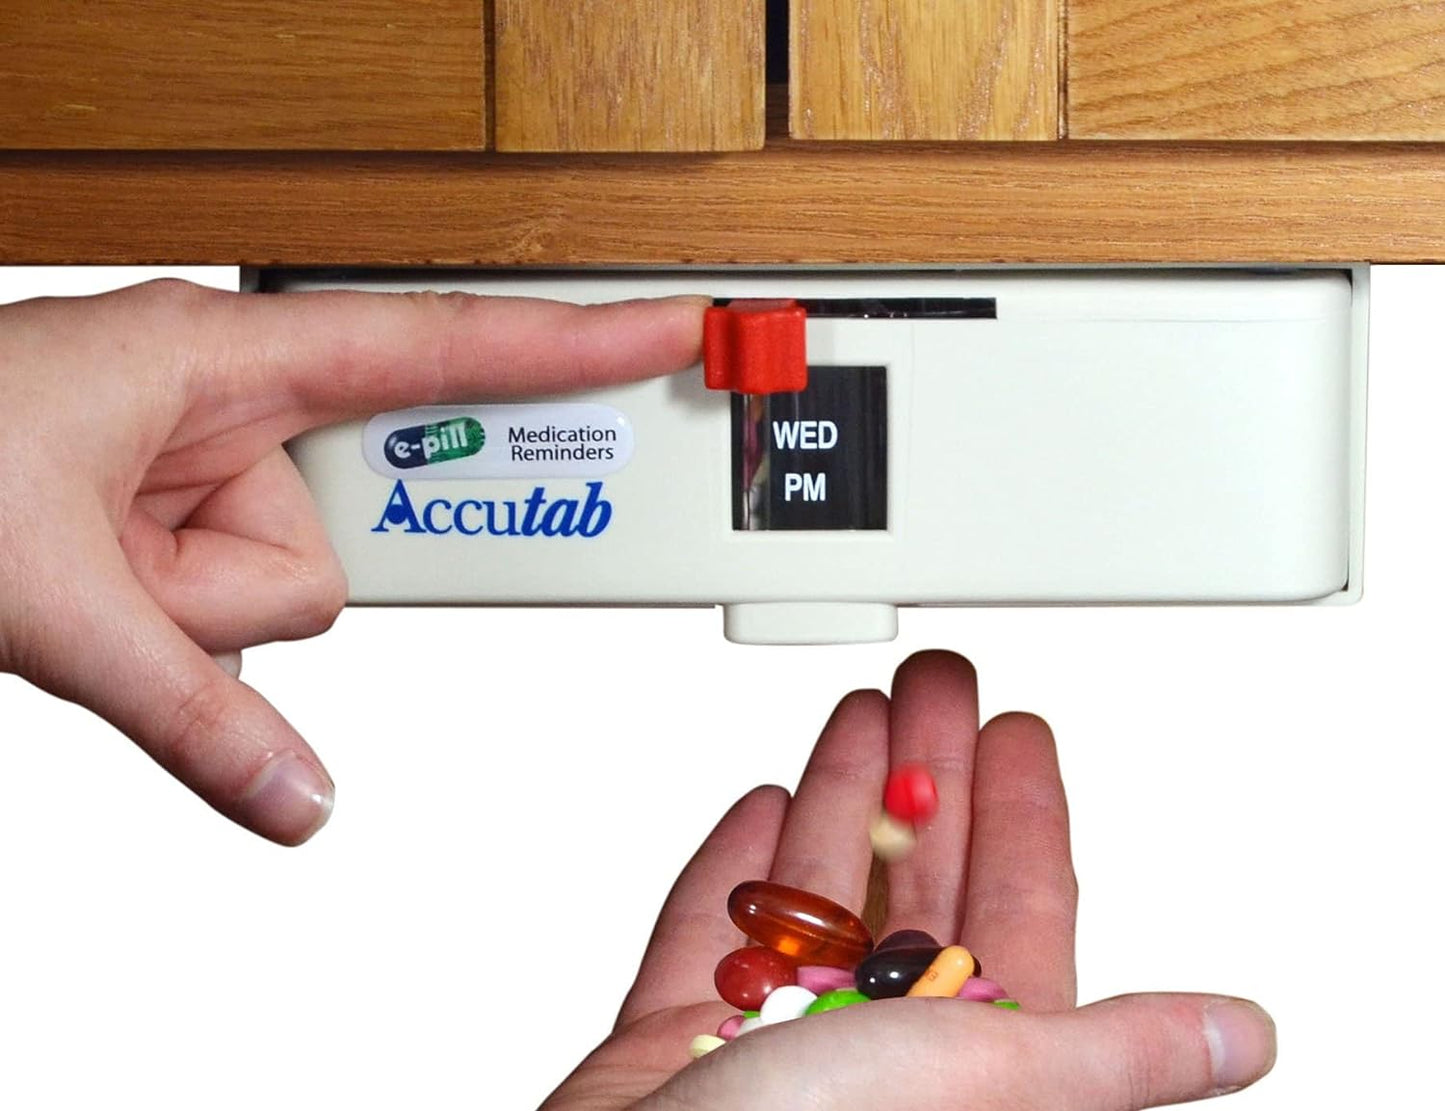 e-Pill Pill Dispenser - Accutab - Weekly - Up to 3 Times Per Day - Large Capacity Pill Organizer